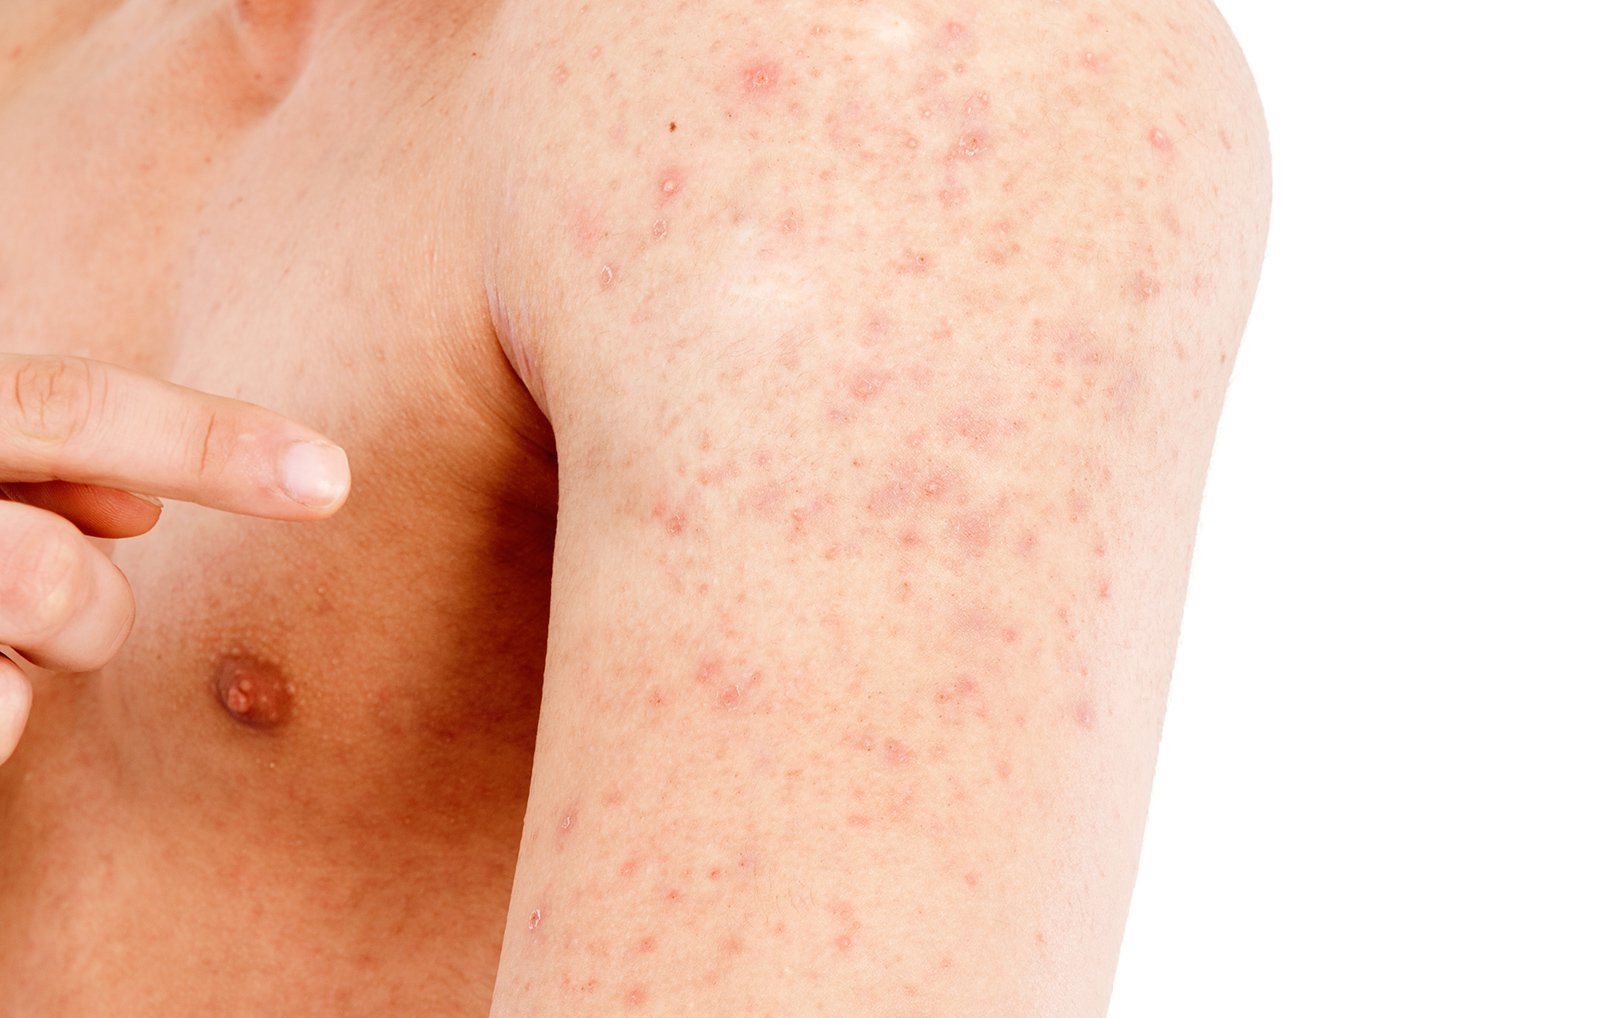 The Best Way to Treat Heat Rash According to a Doctor